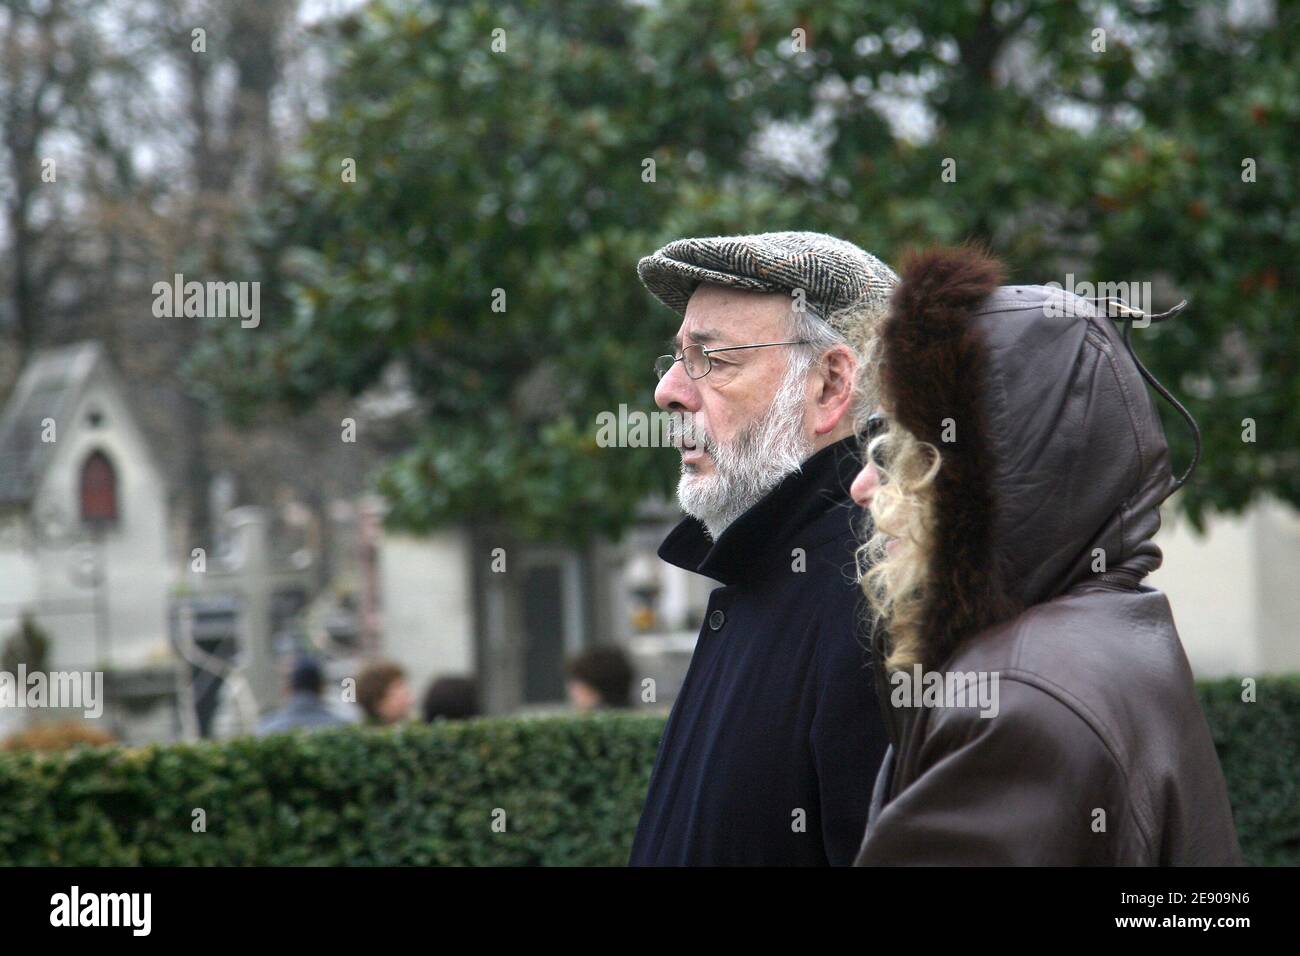 Bertrand Blier attends the funeral of director Pierre Granier-Deferre held at the Pere Lachaise cemetery in Paris, France on November 23, 2007. Photo by Mousse-Khayat/ABACAPRESS.COM Stock Photo